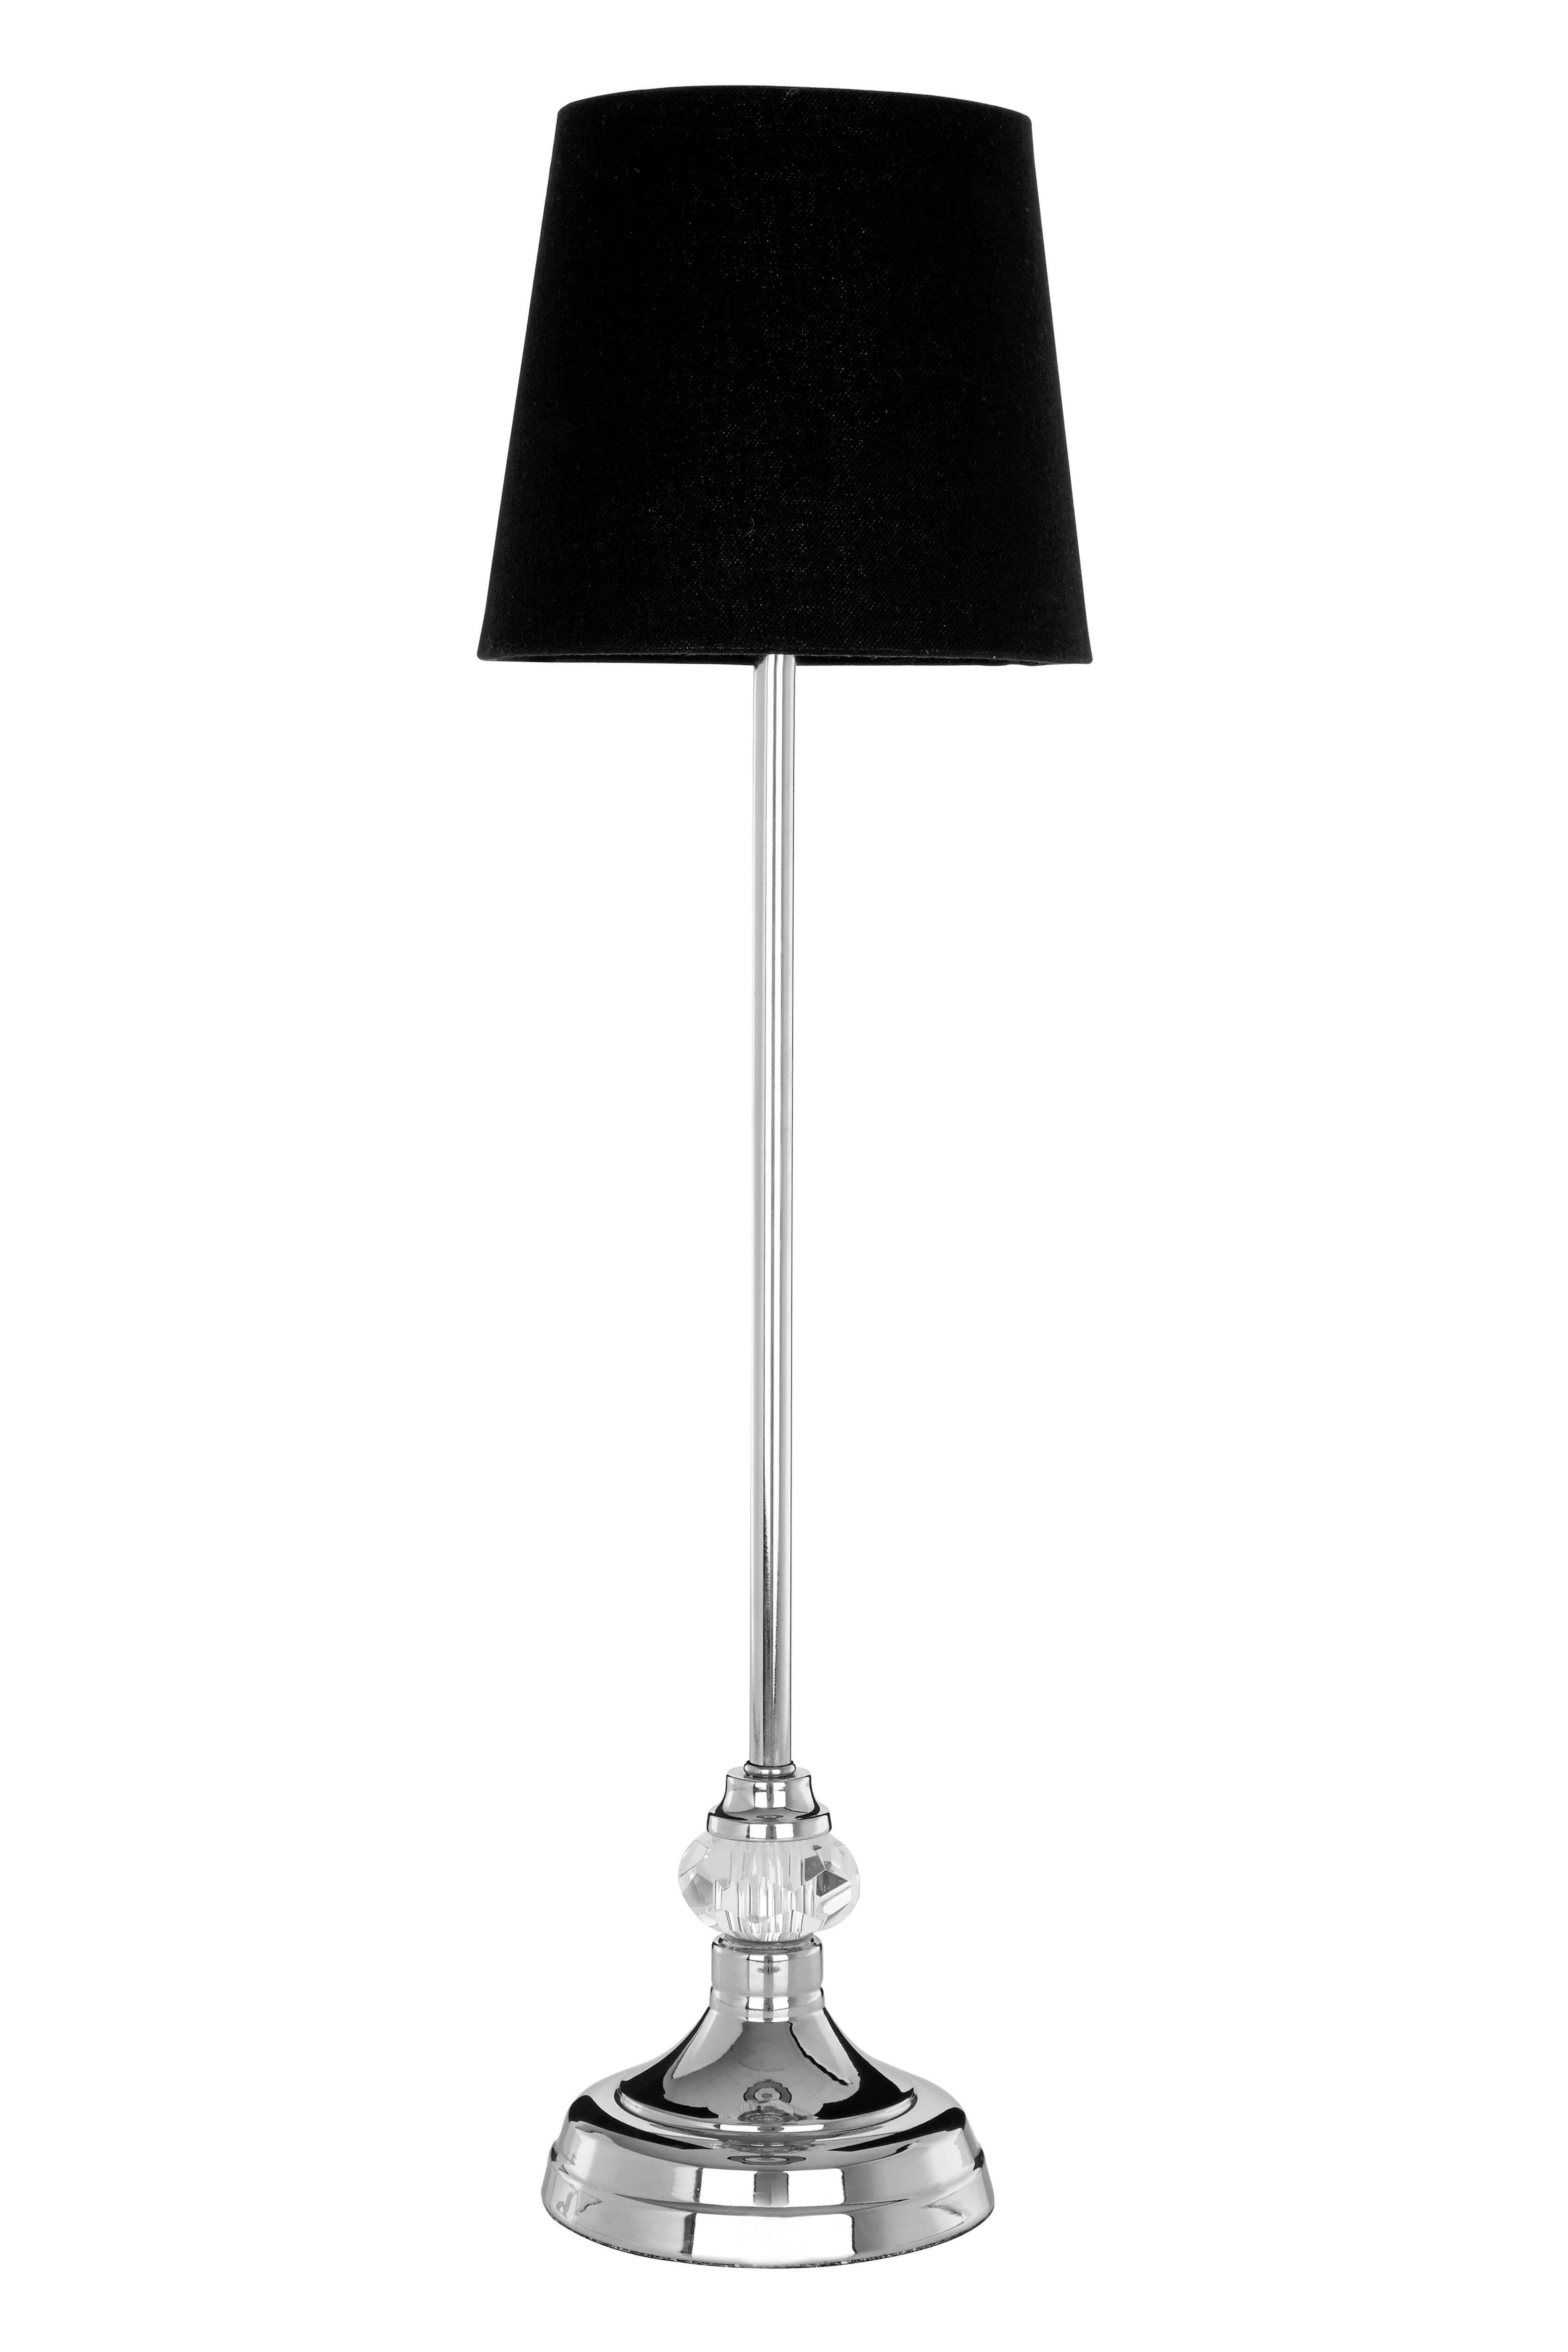 Interiors by Premier Ursa Table Lamp with UK Plug